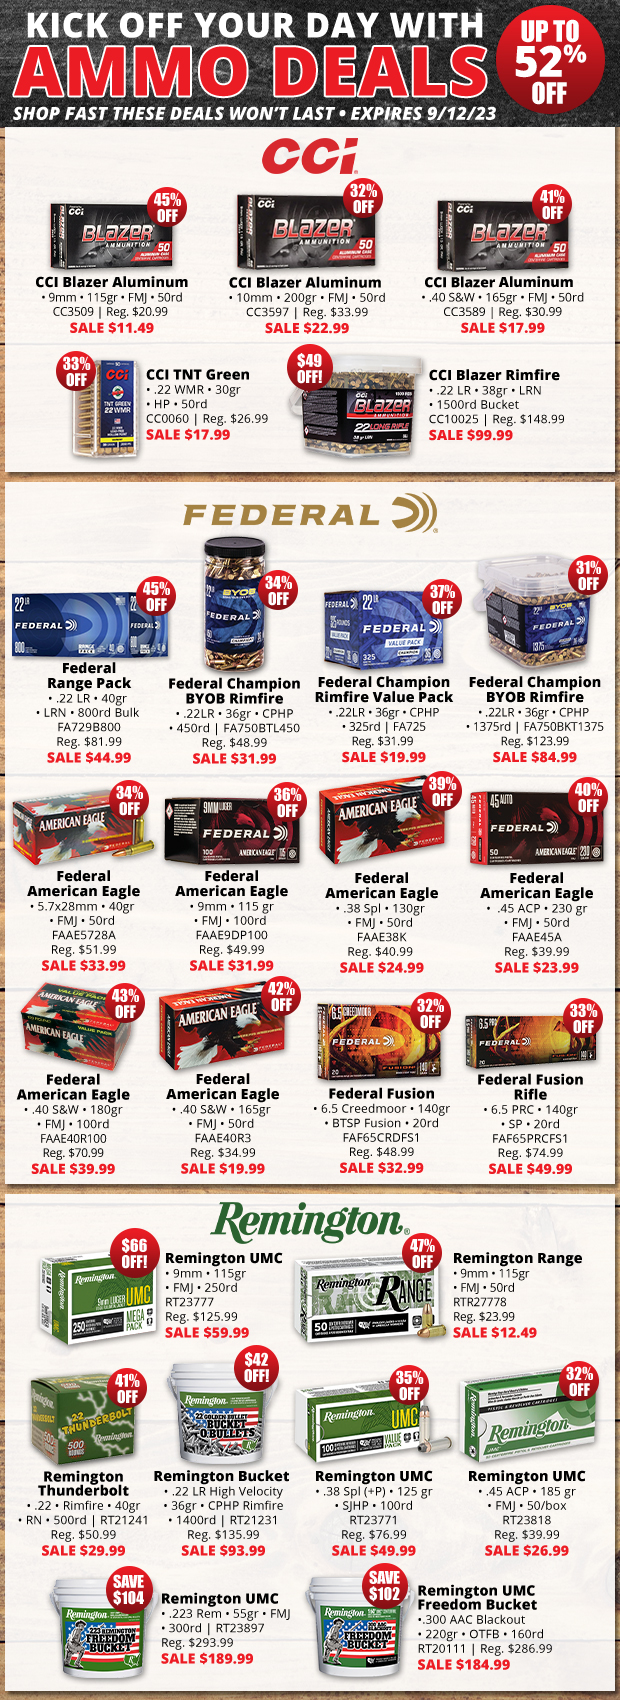 Kick Off Your Day with Ammo Deals